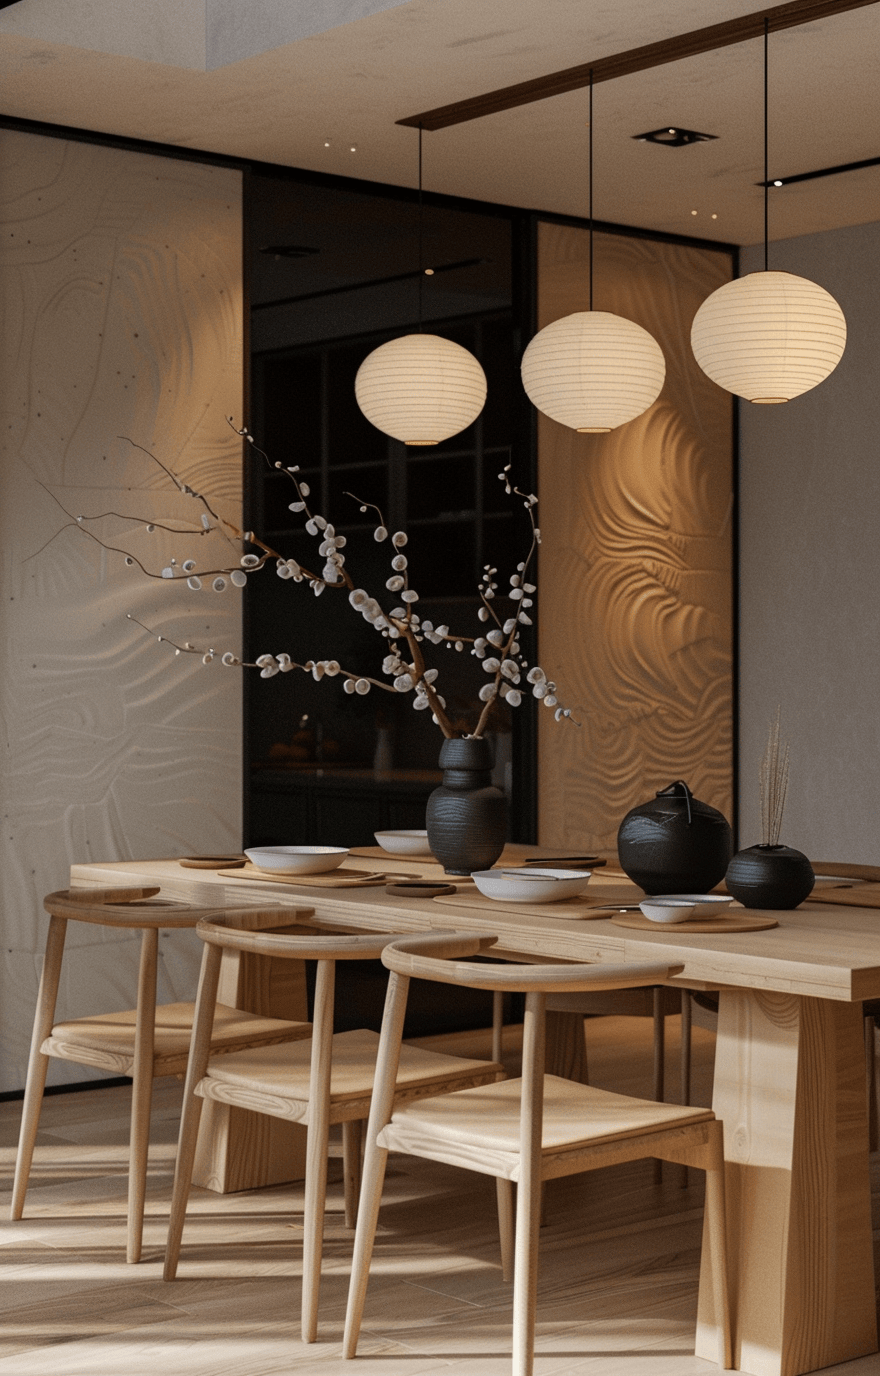 Wabi-sabi influences in the decor of a Japandi dining space